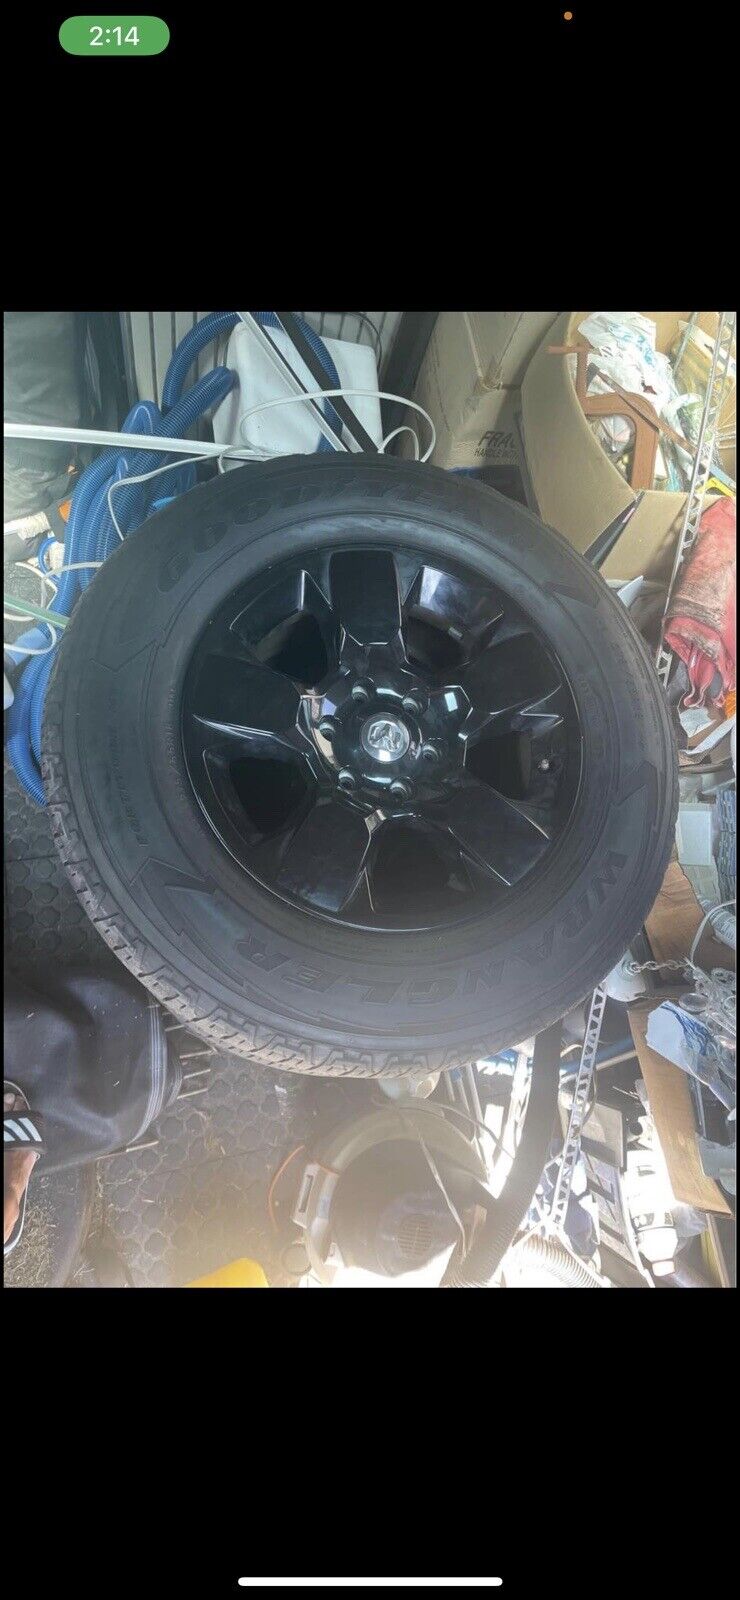 dodge ram 1500 tires and wheel 18”